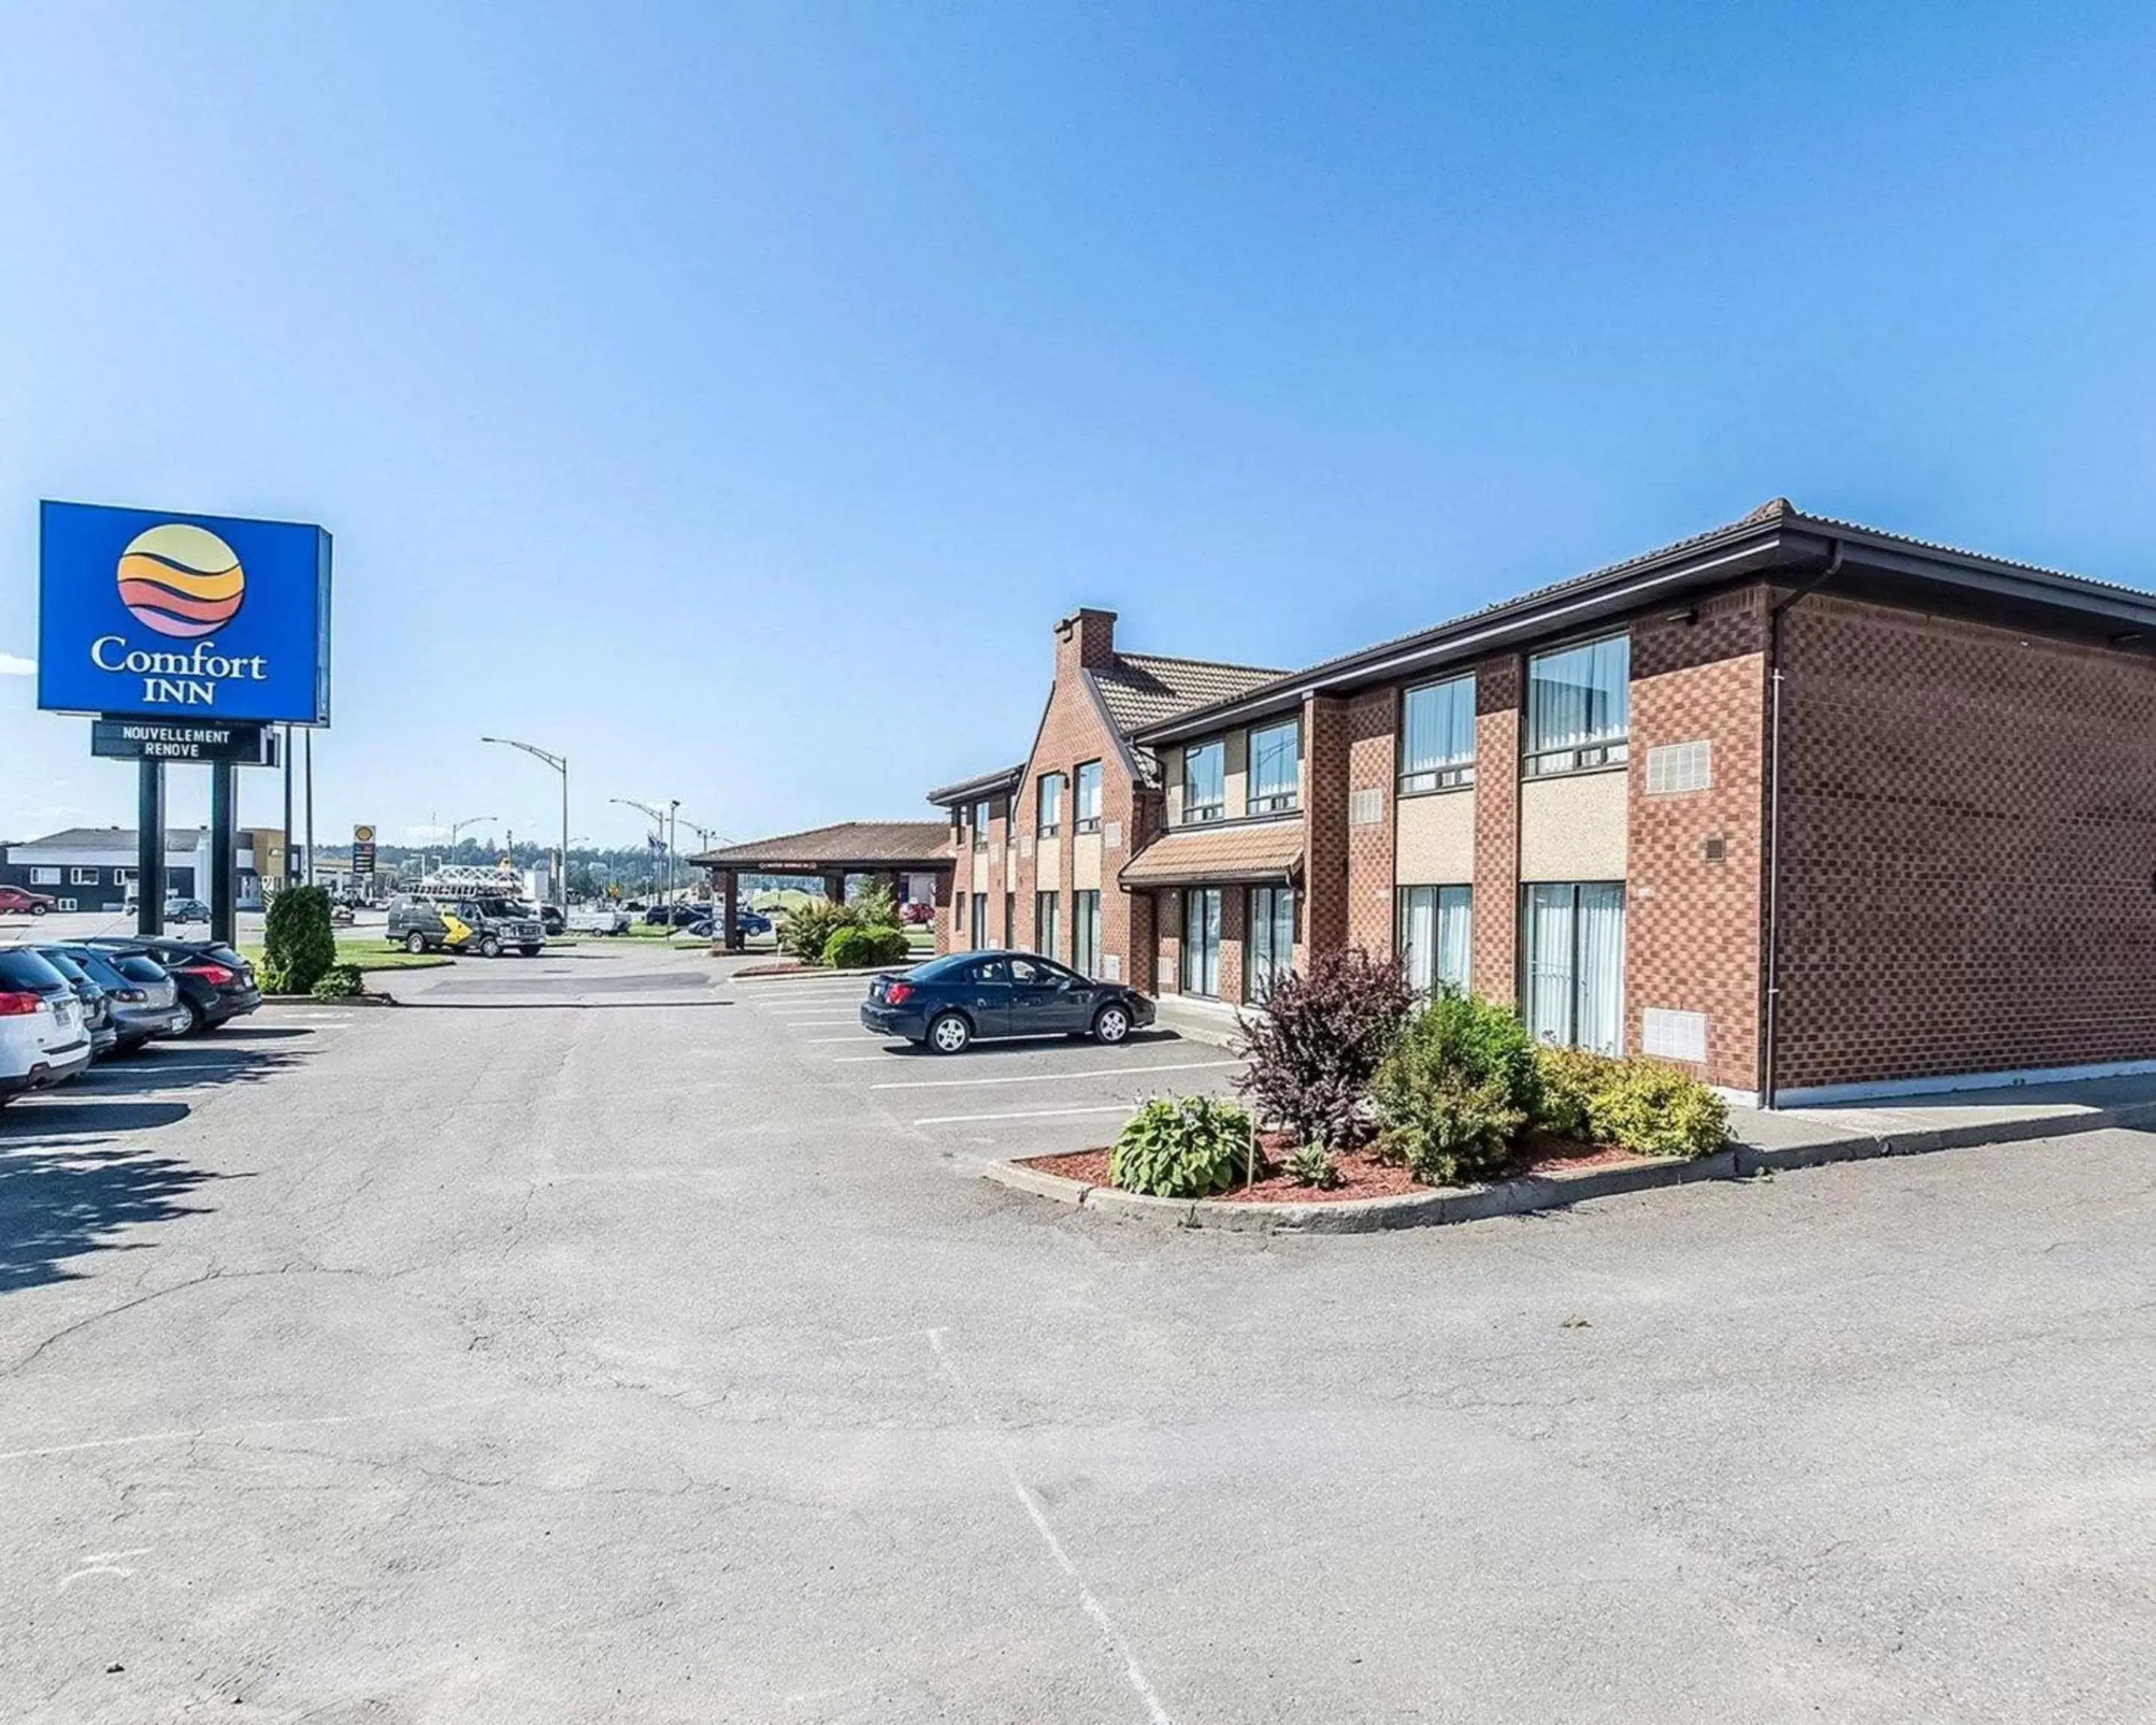 Property Building in Comfort Inn Riviere-du-Loup